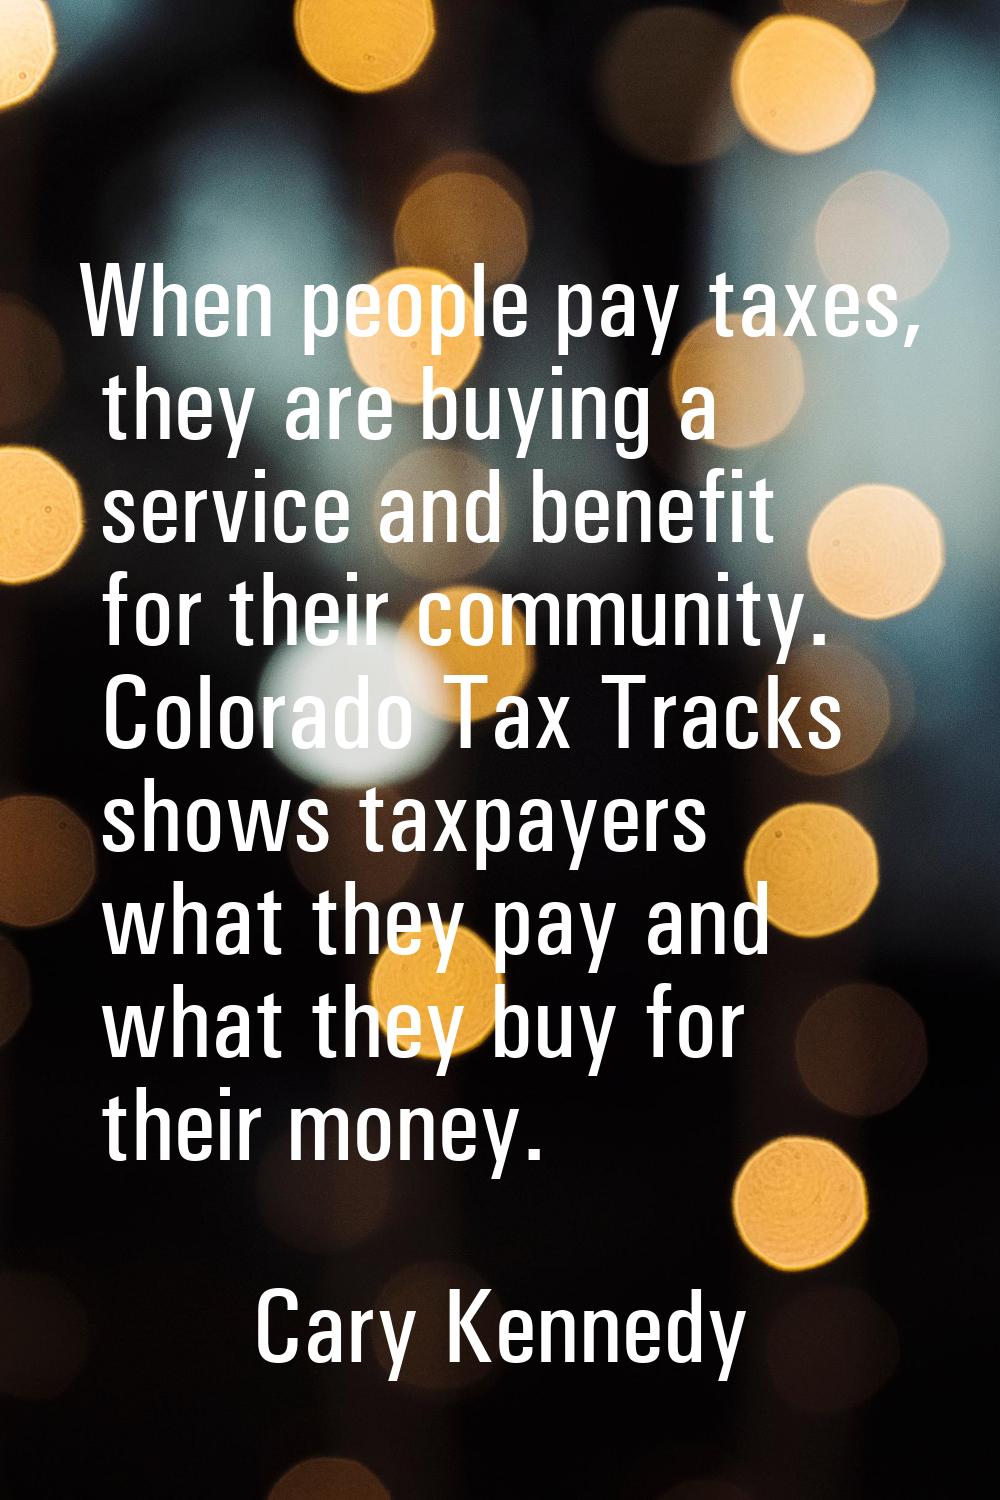 When people pay taxes, they are buying a service and benefit for their community. Colorado Tax Trac